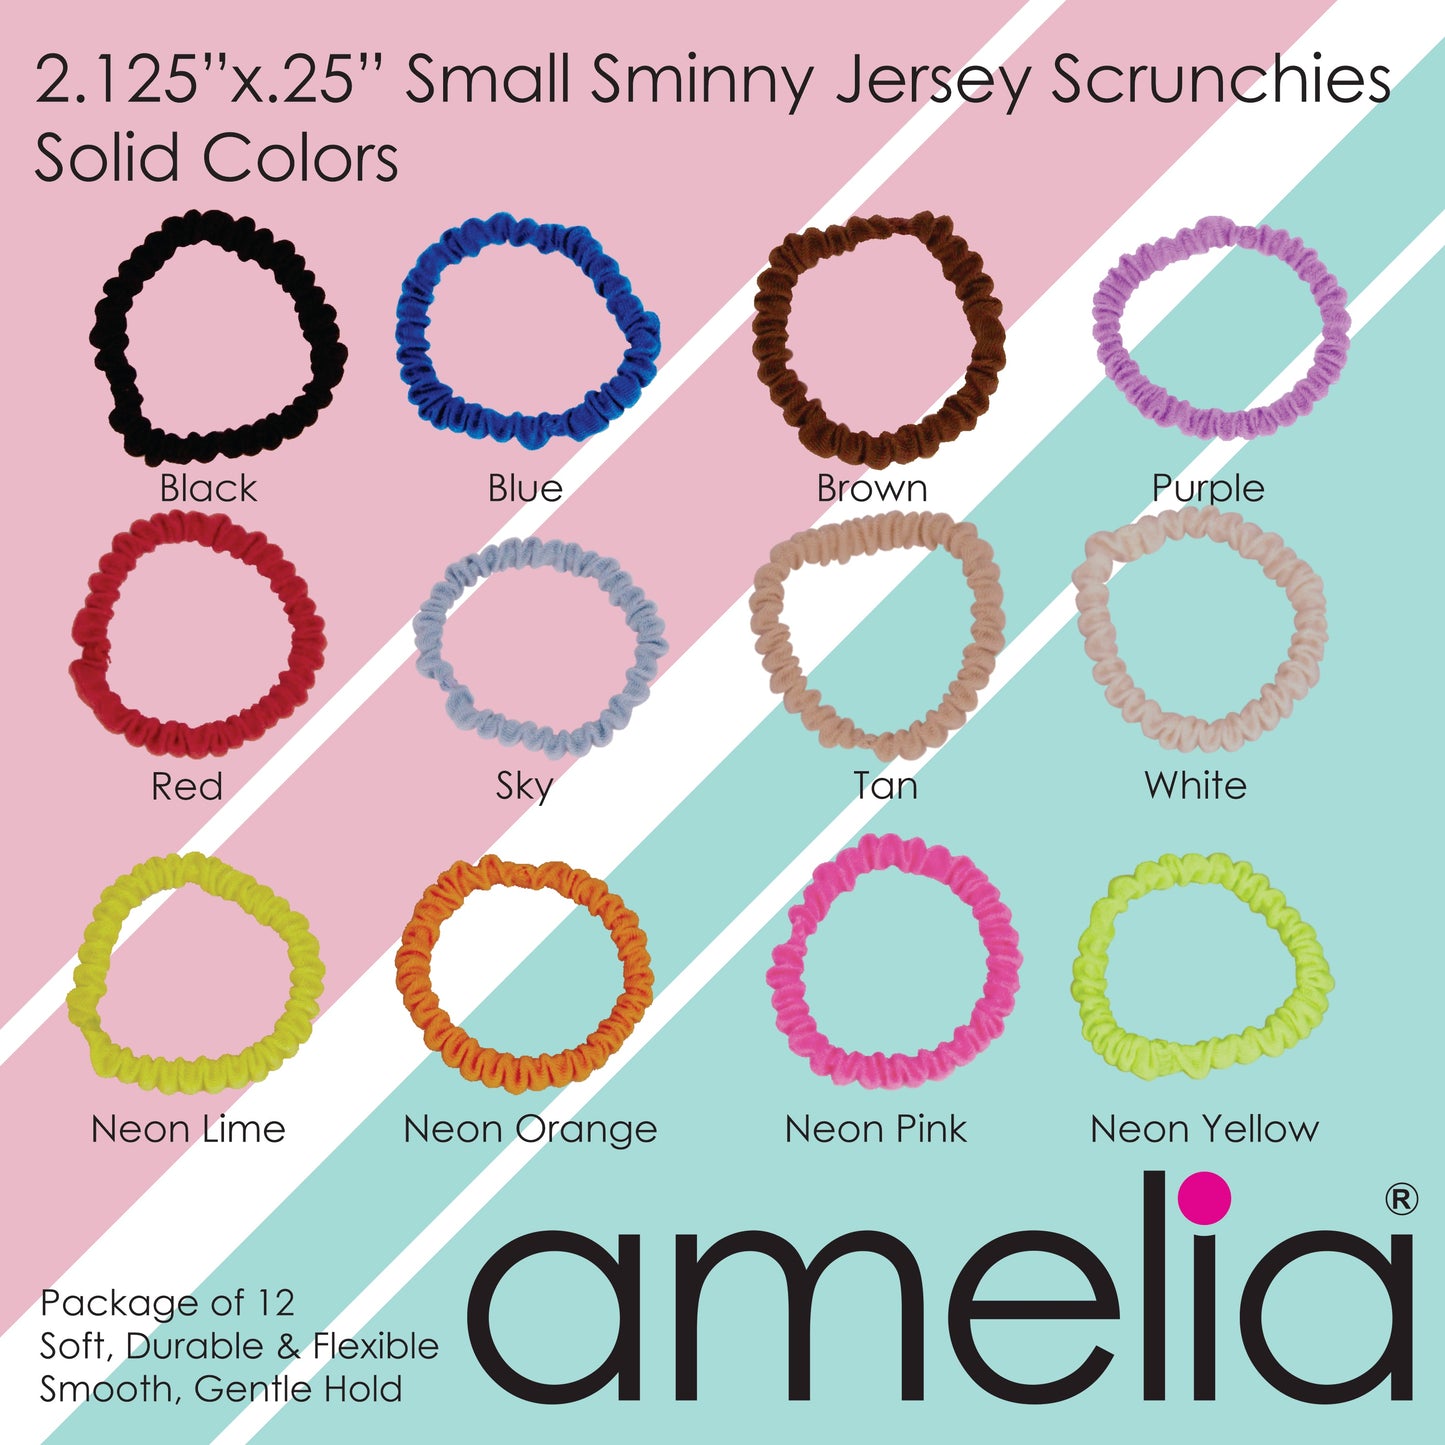 Amelia Beauty, Ocean Blend Skinny Jersey Scrunchies, 2.125in Diameter, Gentle on Hair, Strong Hold, No Snag, No Dents or Creases. 12 Pack